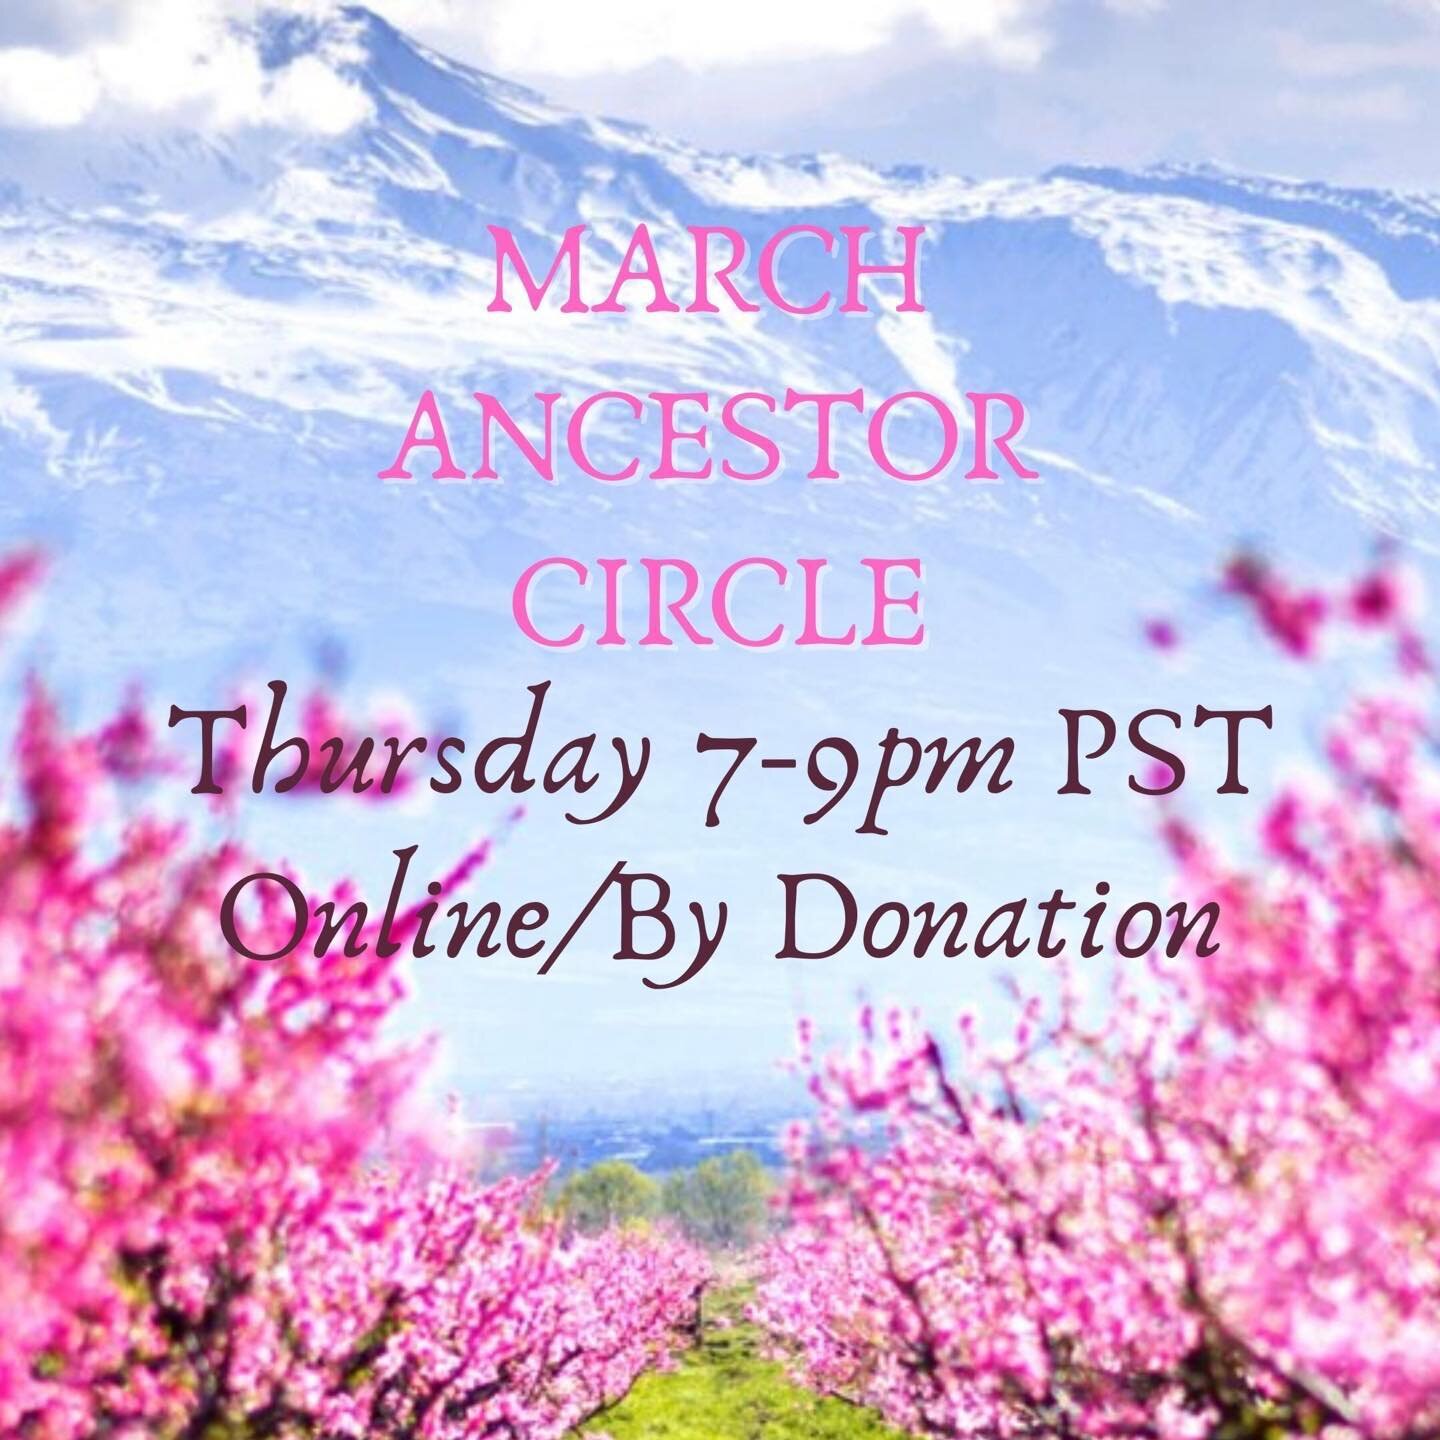 Registration is now open for the  March Ancestral Healing Circle. I host these monthly gatherings online &amp; by donation. RSVP is required. Circles are open to existing clients and folks with prior experience with the Ancestral Lineage Healing fram